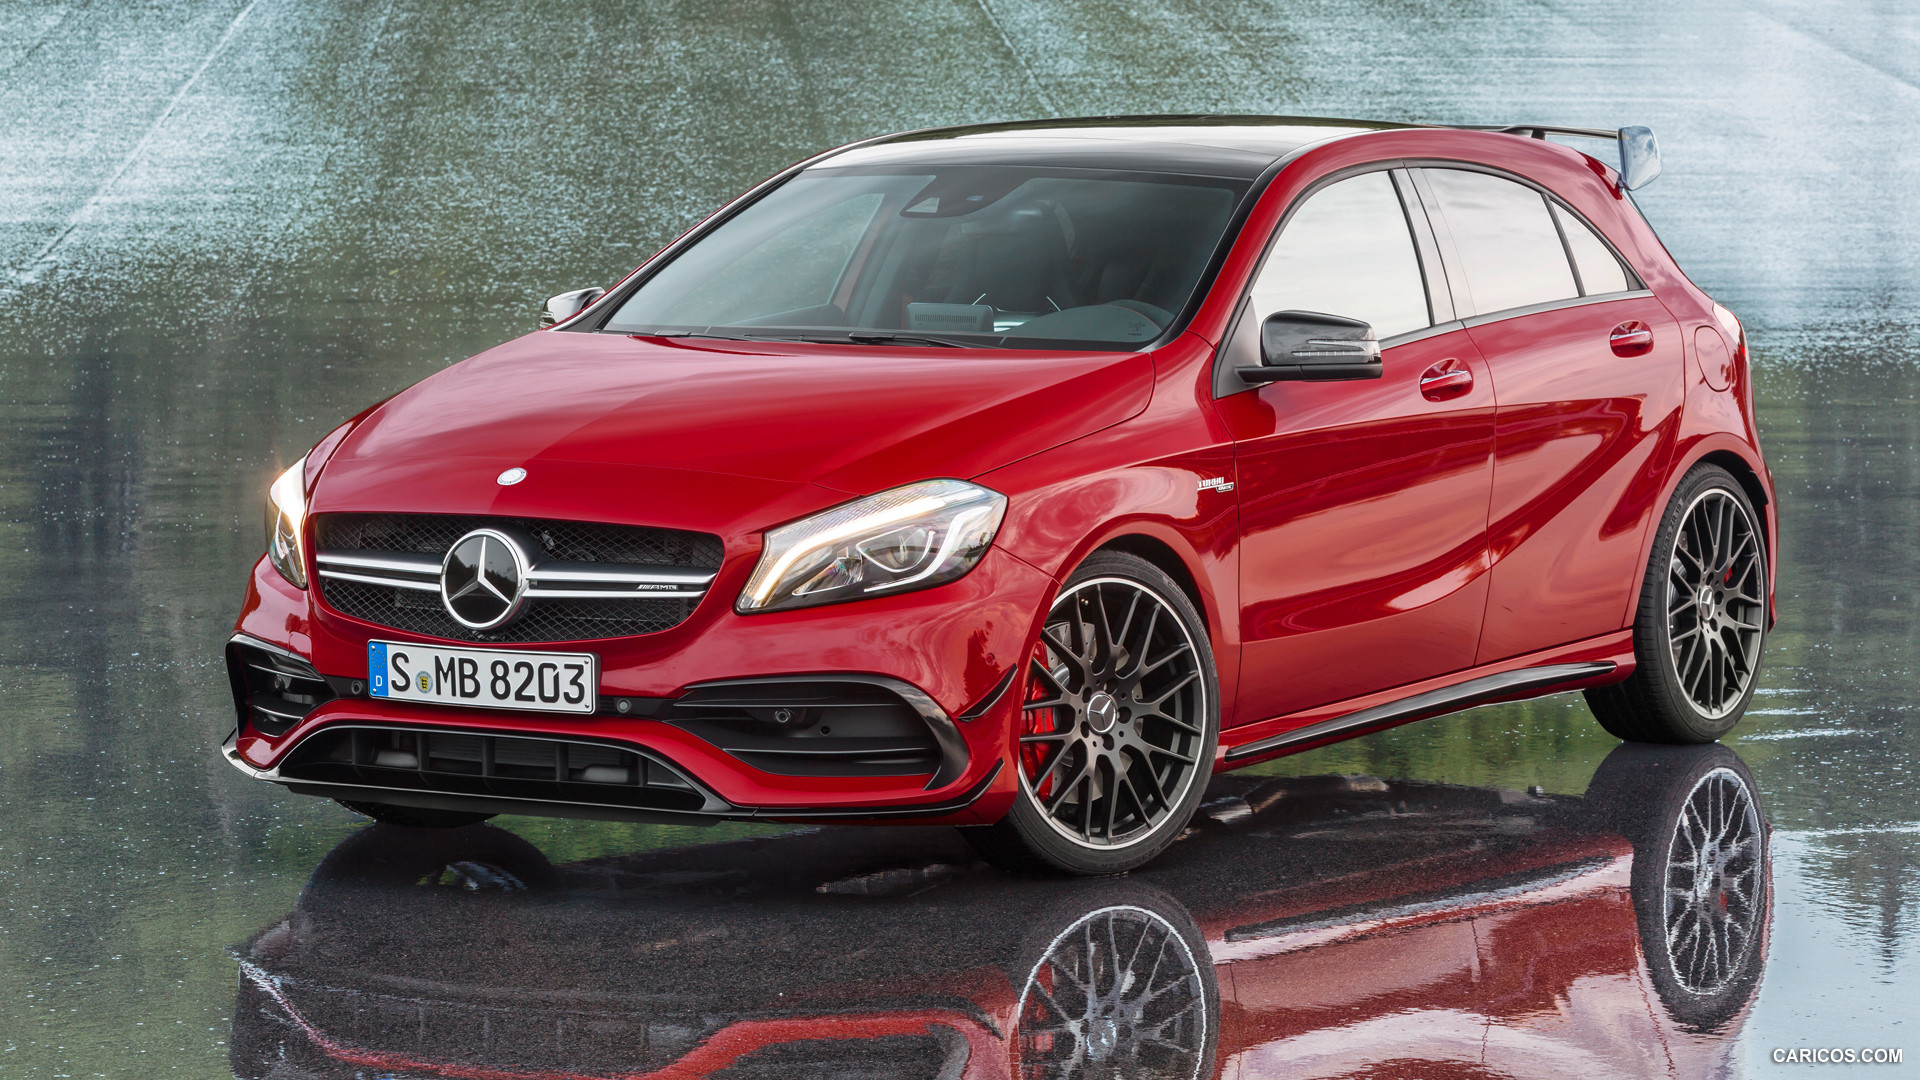 2016 Mercedes-AMG A45 AMG Exclusive (Jupiter Red) - Front, #1 of 15